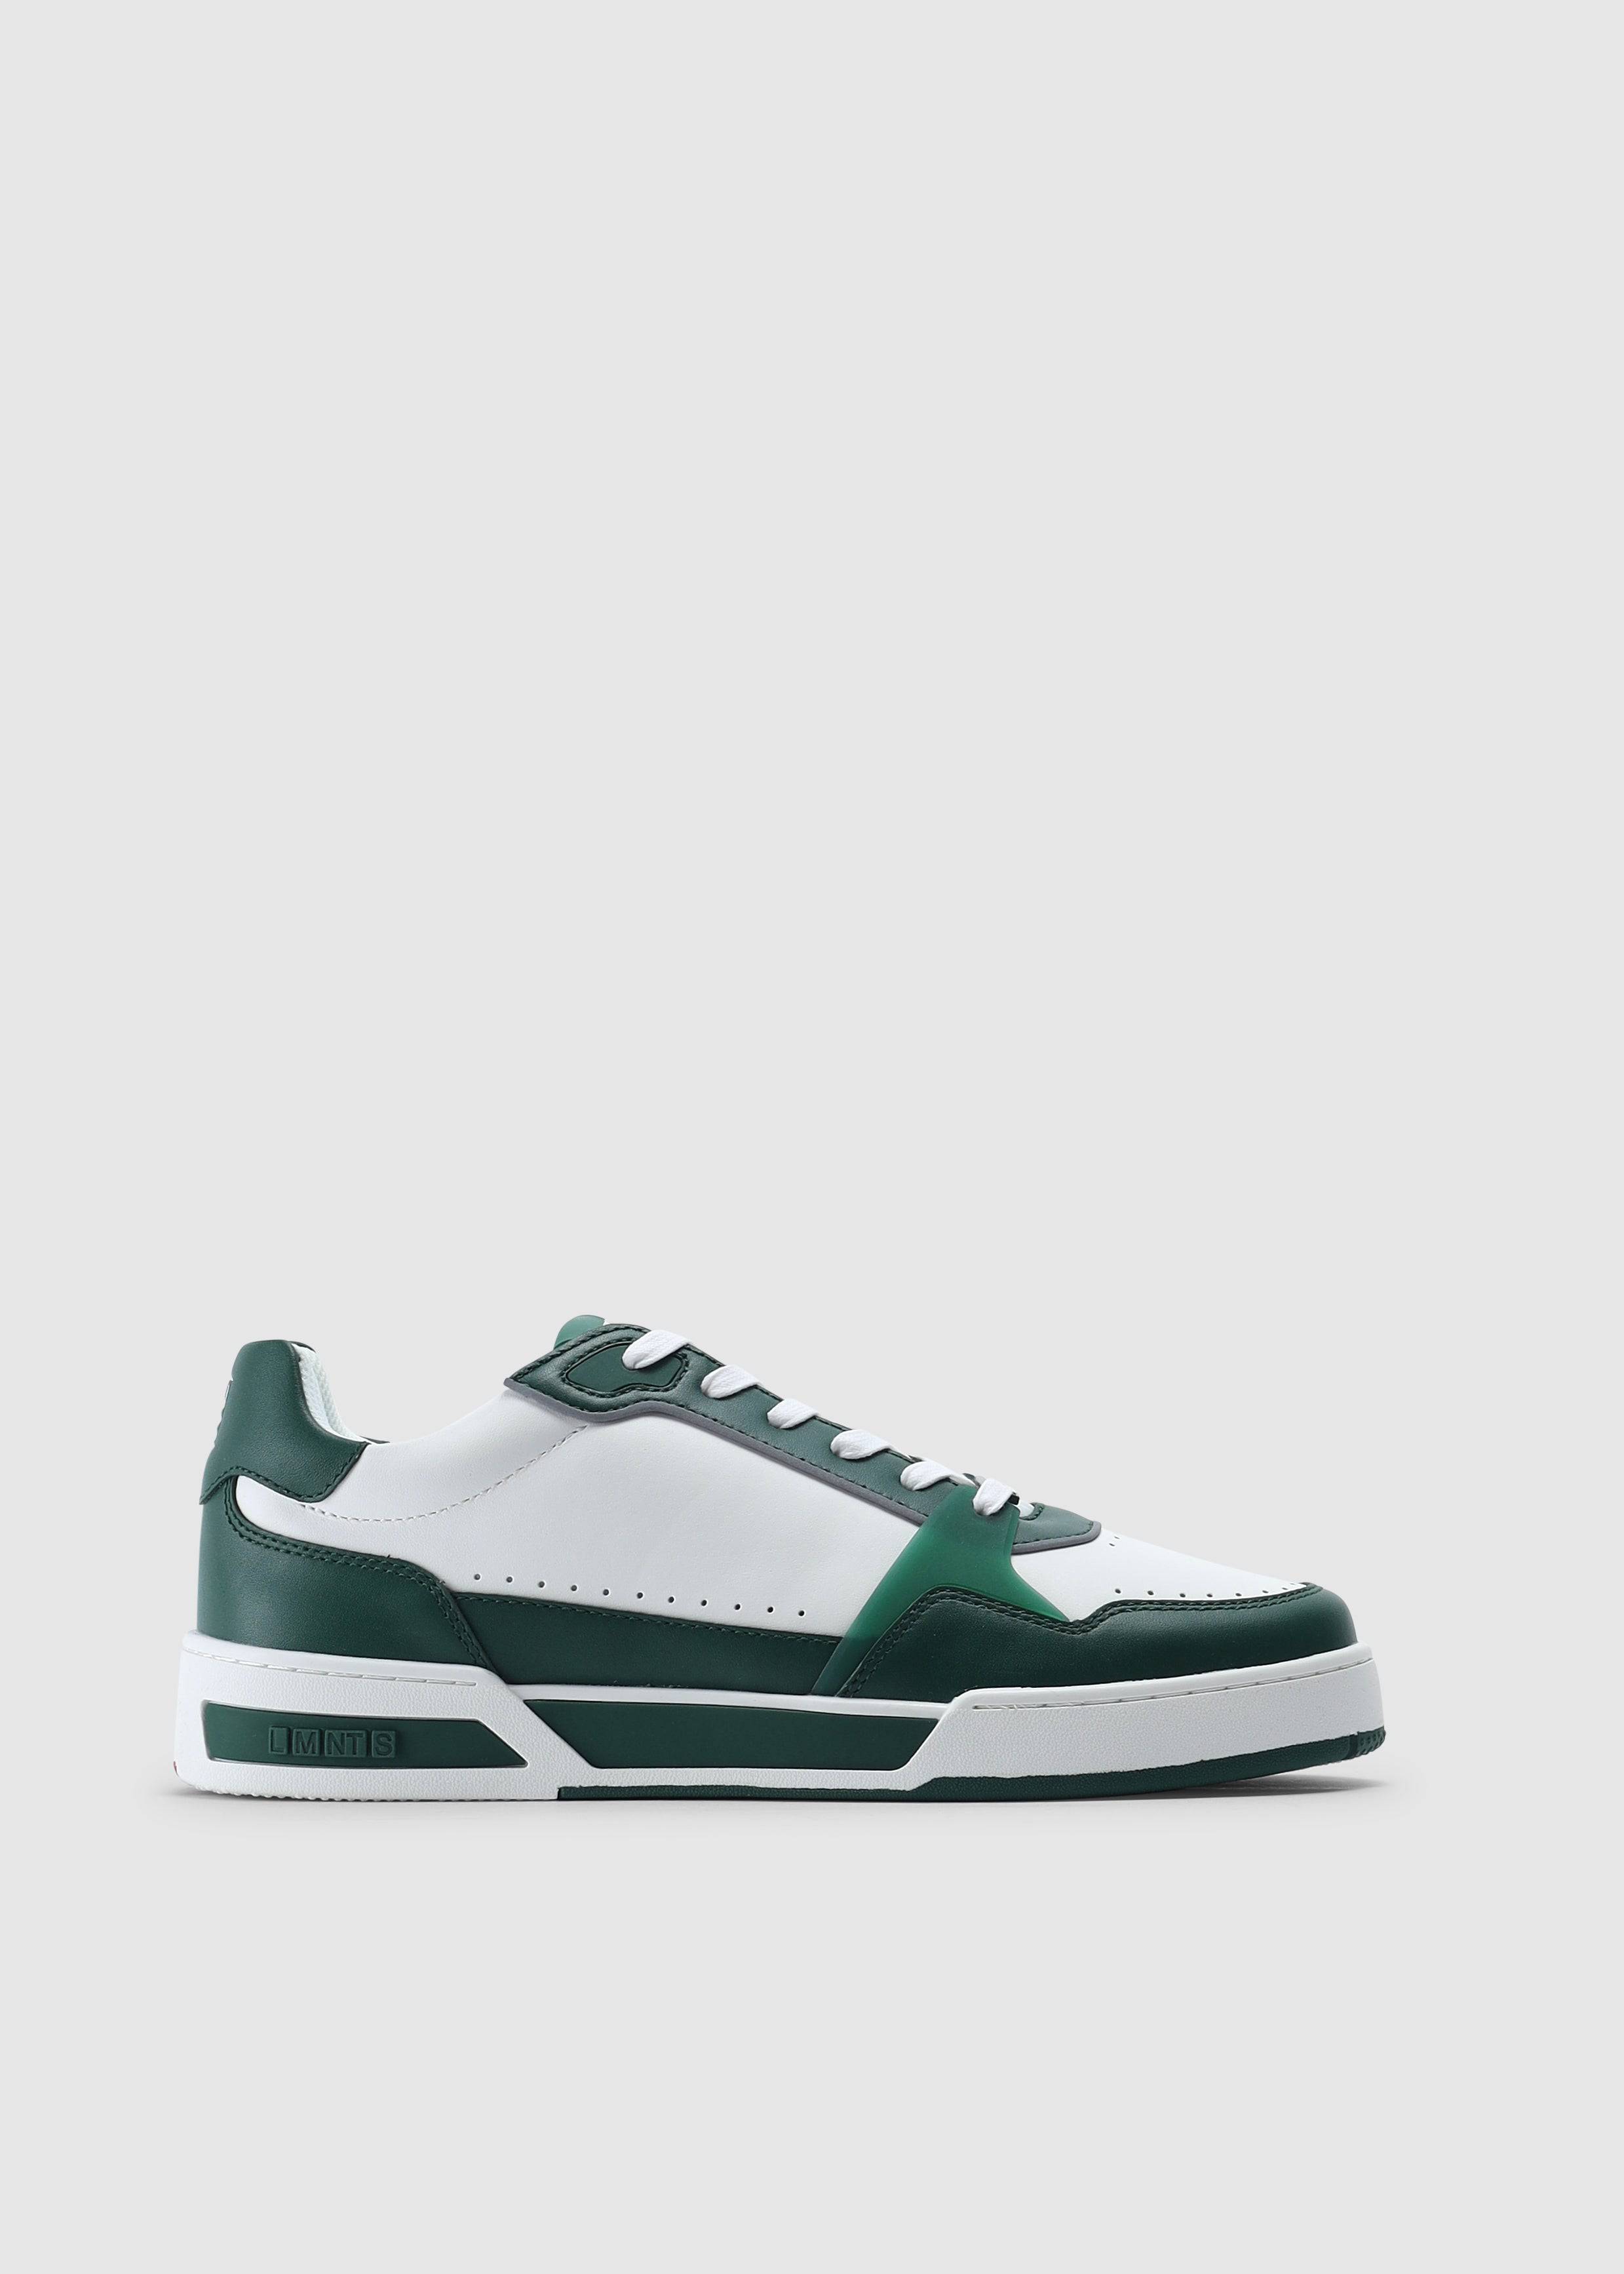 Image of LMNTS Mens Porter Trainers In White/Green